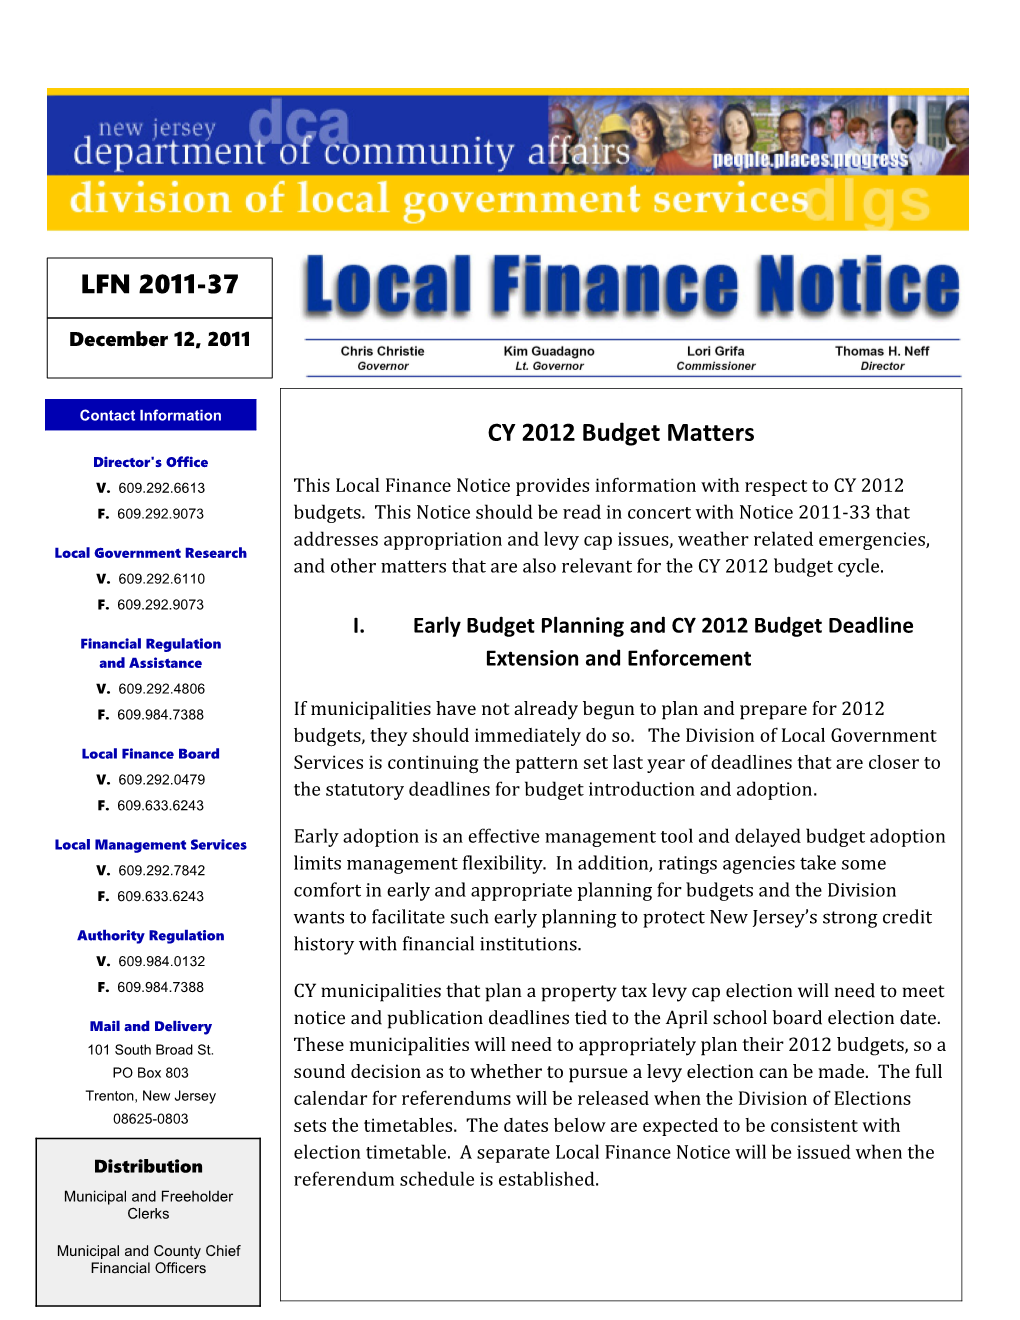 Local Finance Notice 2011-37December 12, 2011Page 1